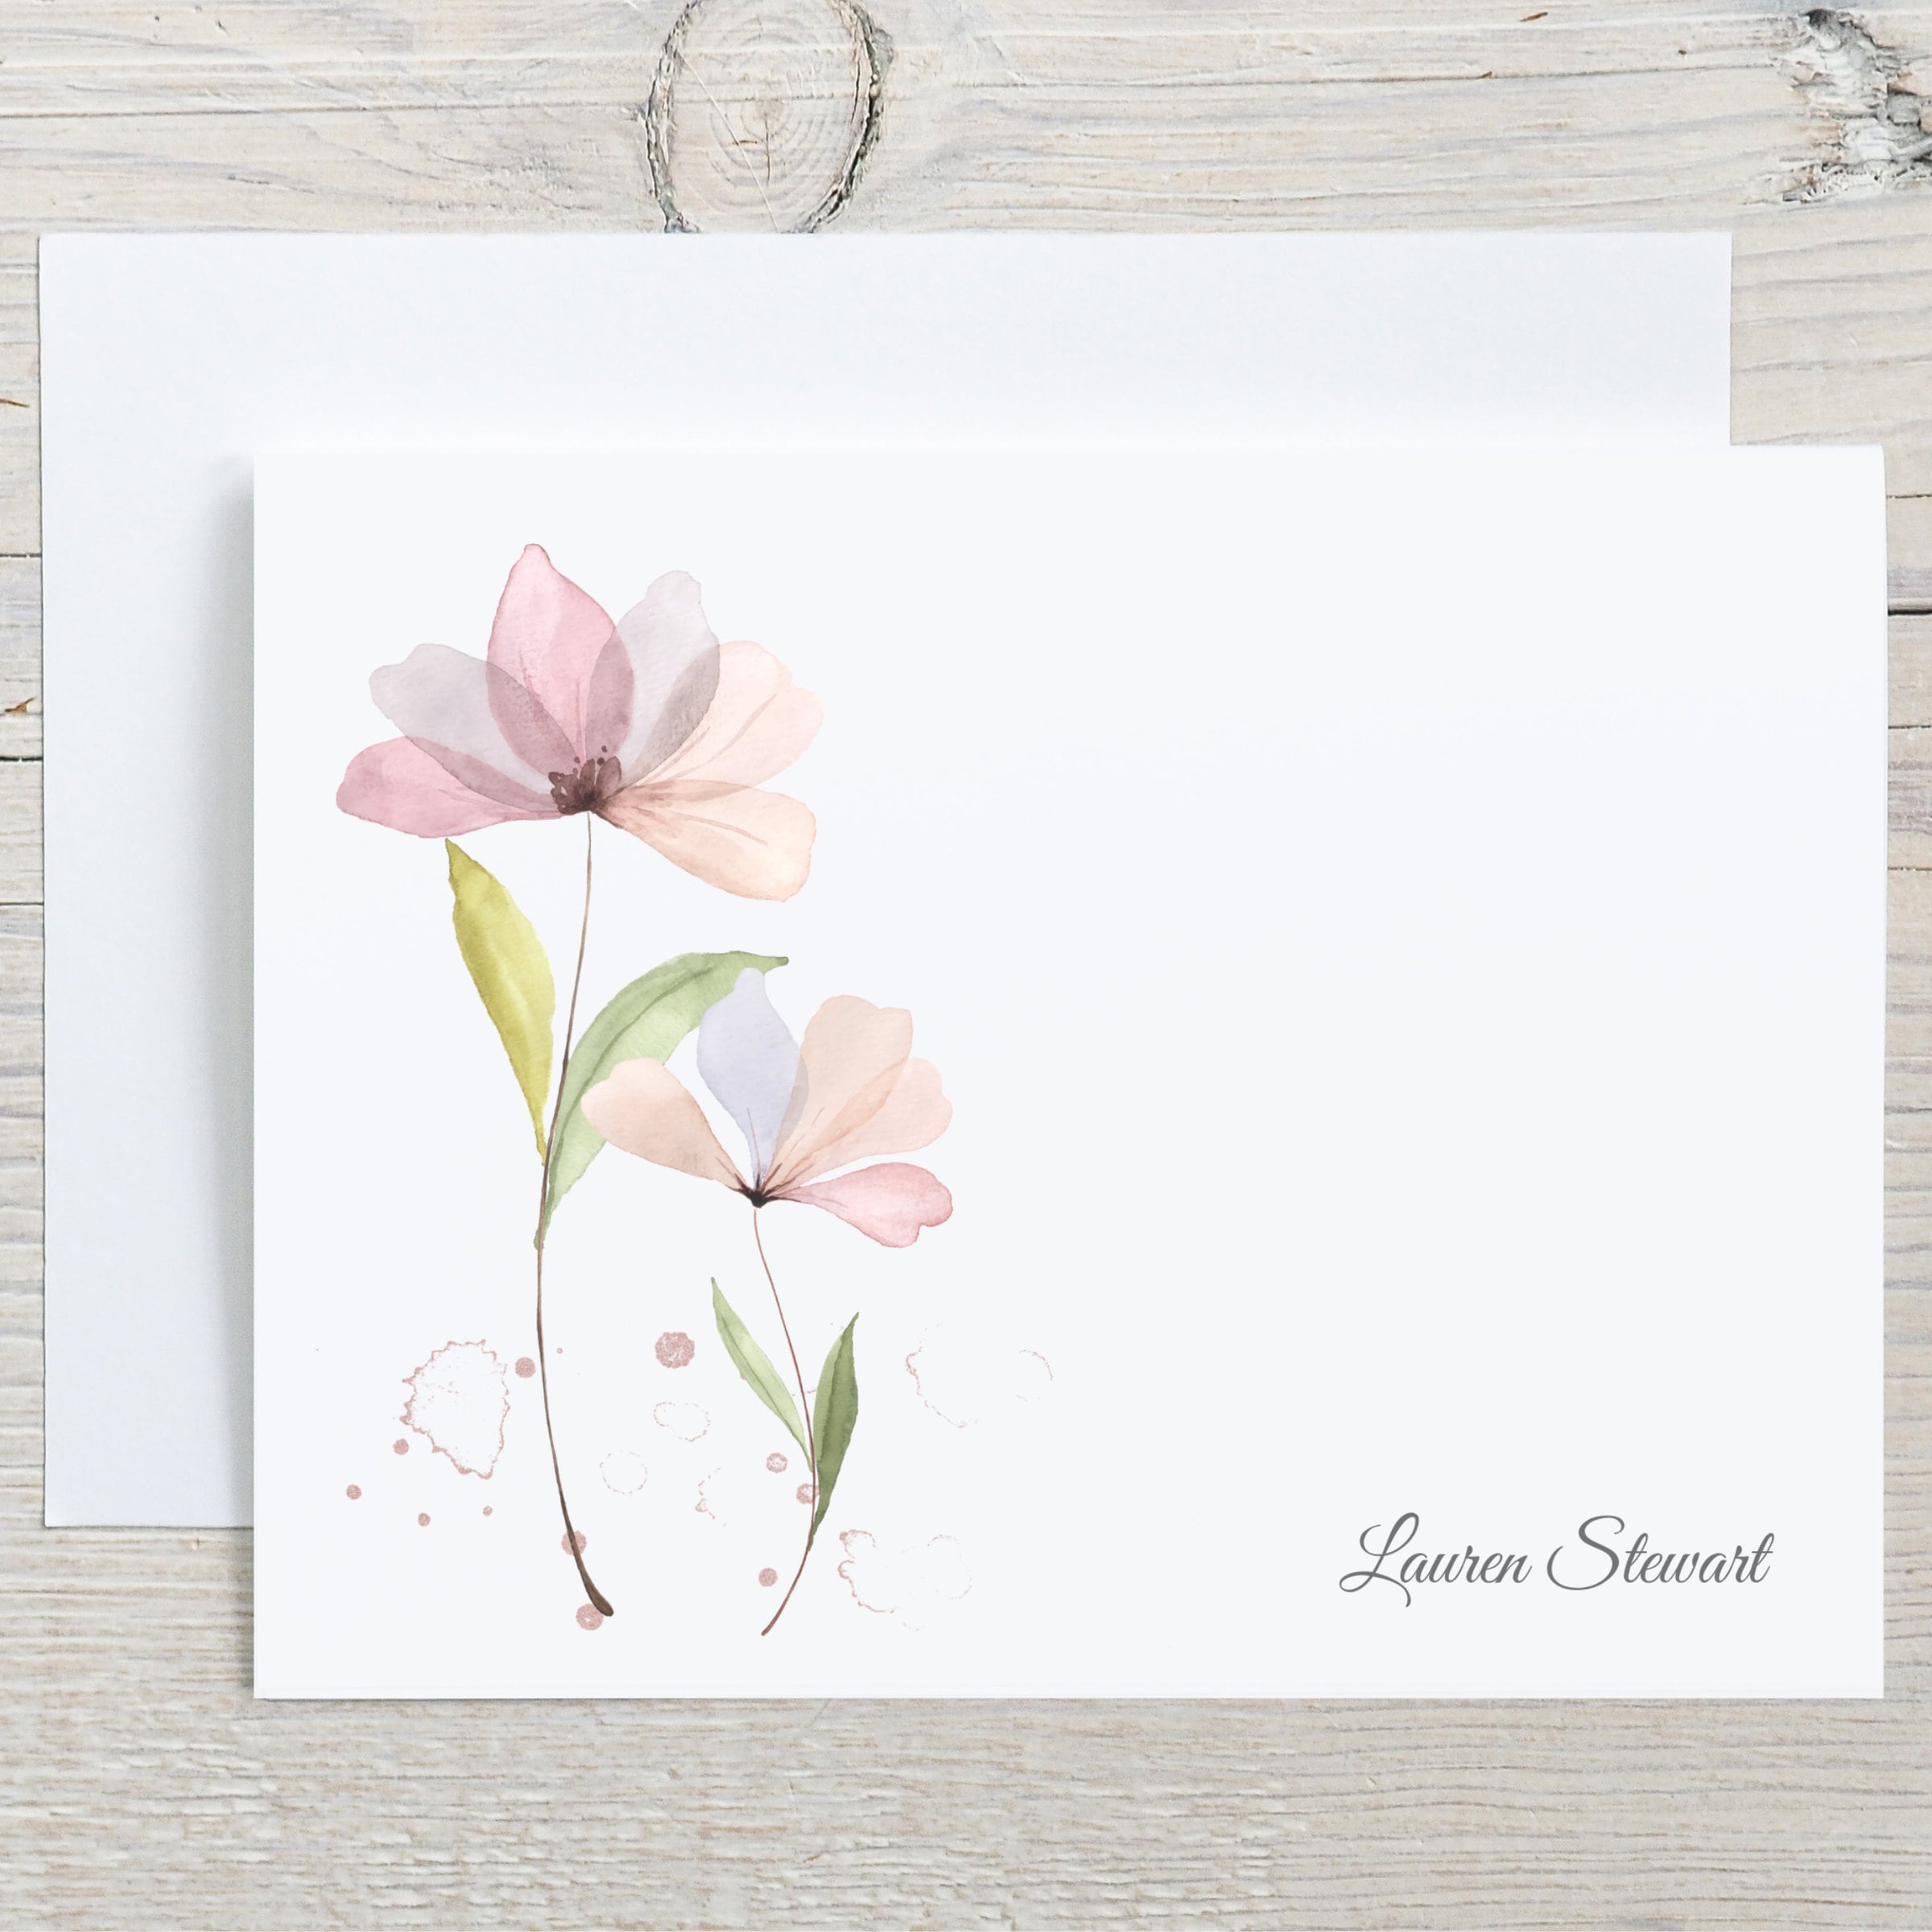 Personalized Stationary Gift, Custom Stationery Set for Women, Note Card  With Envelope, Personalize Stationary for Her, Floral Notecards 